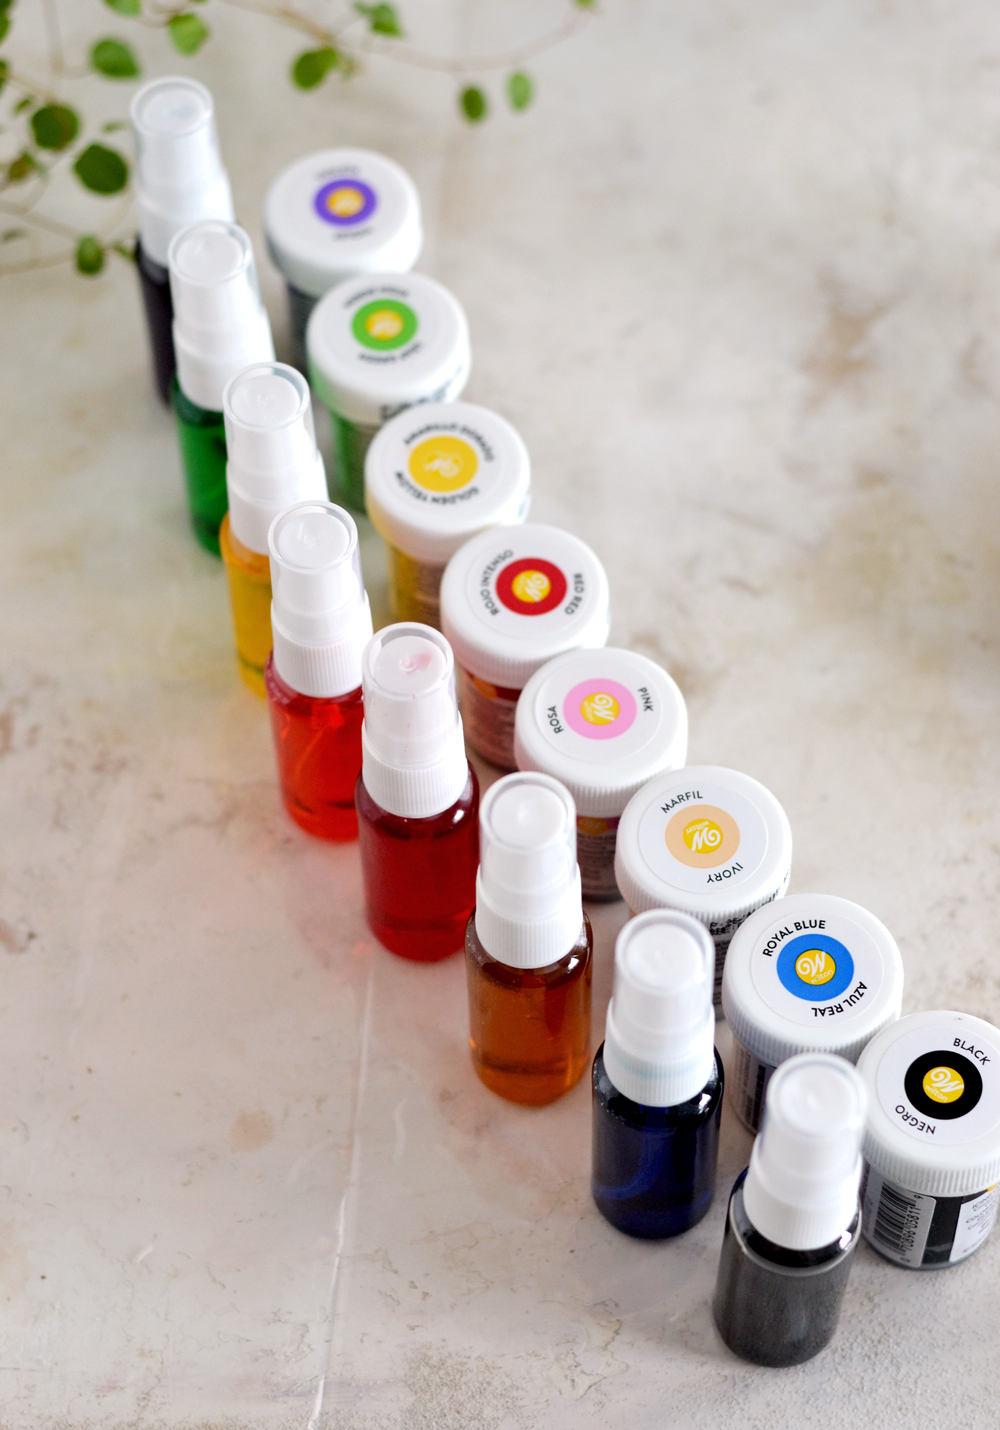  DIY Spray Inks - all the initial colors